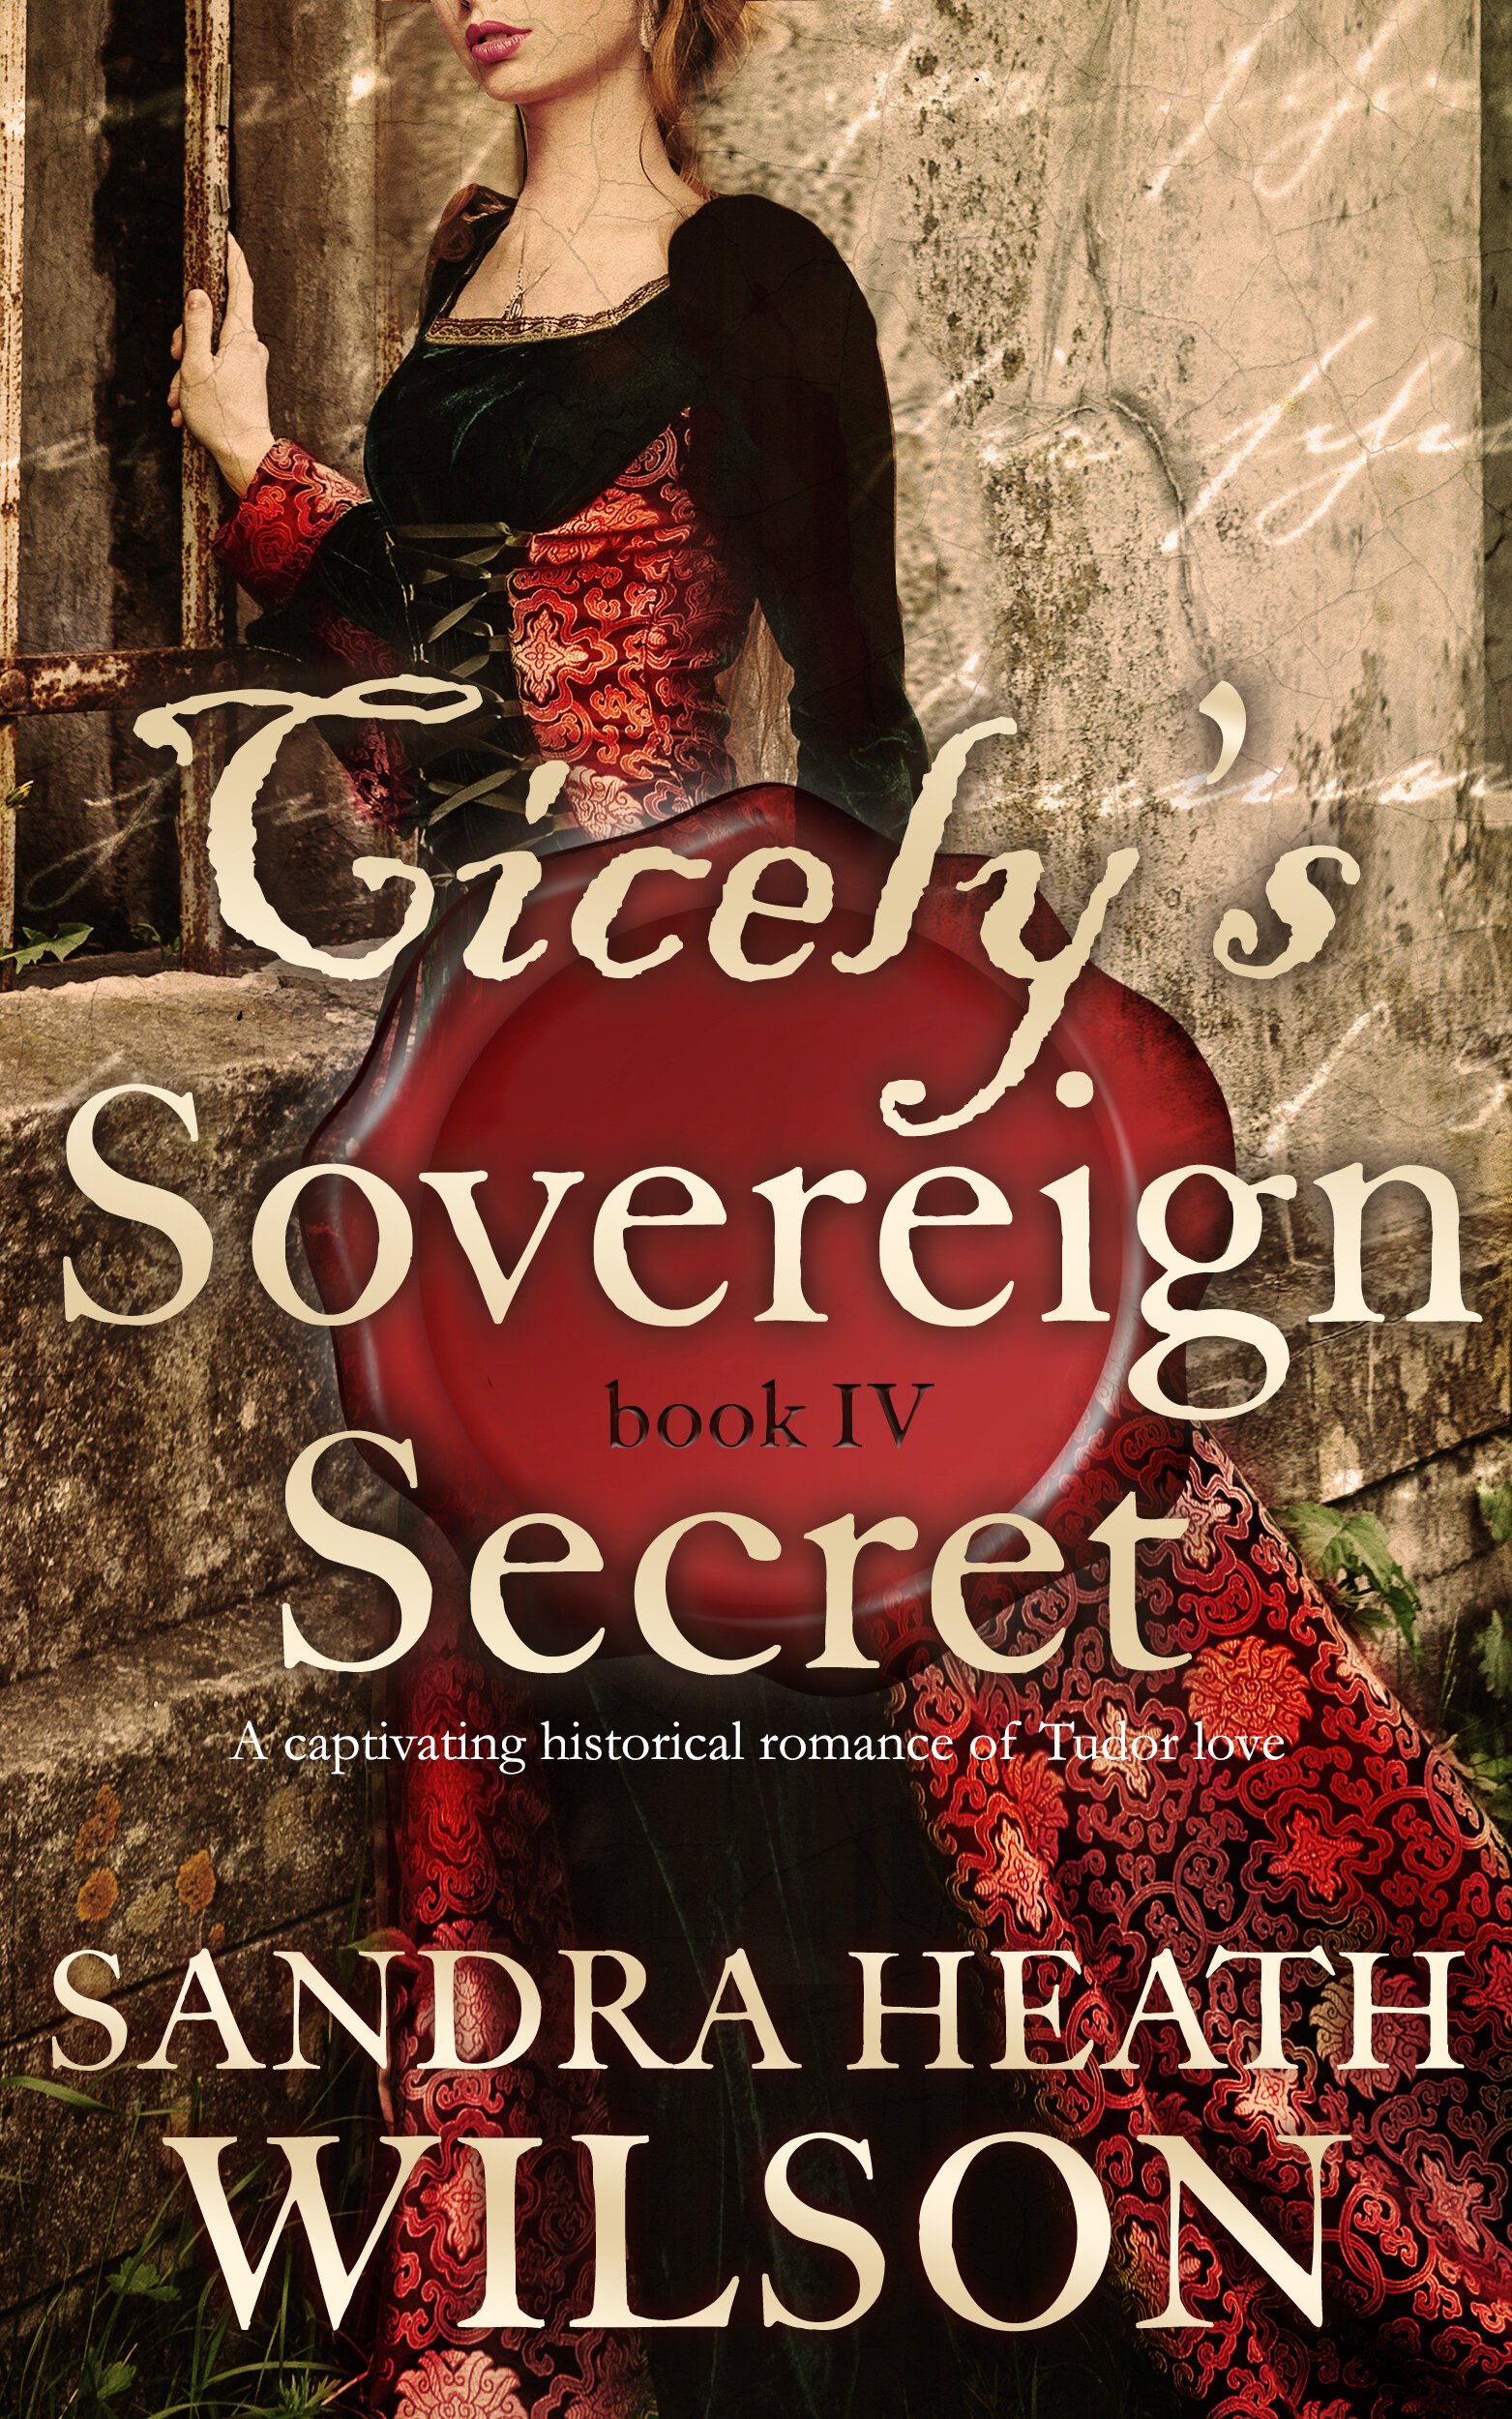 CICELY'S SOVEREIGN SECRET publish cover with tagline.jpg